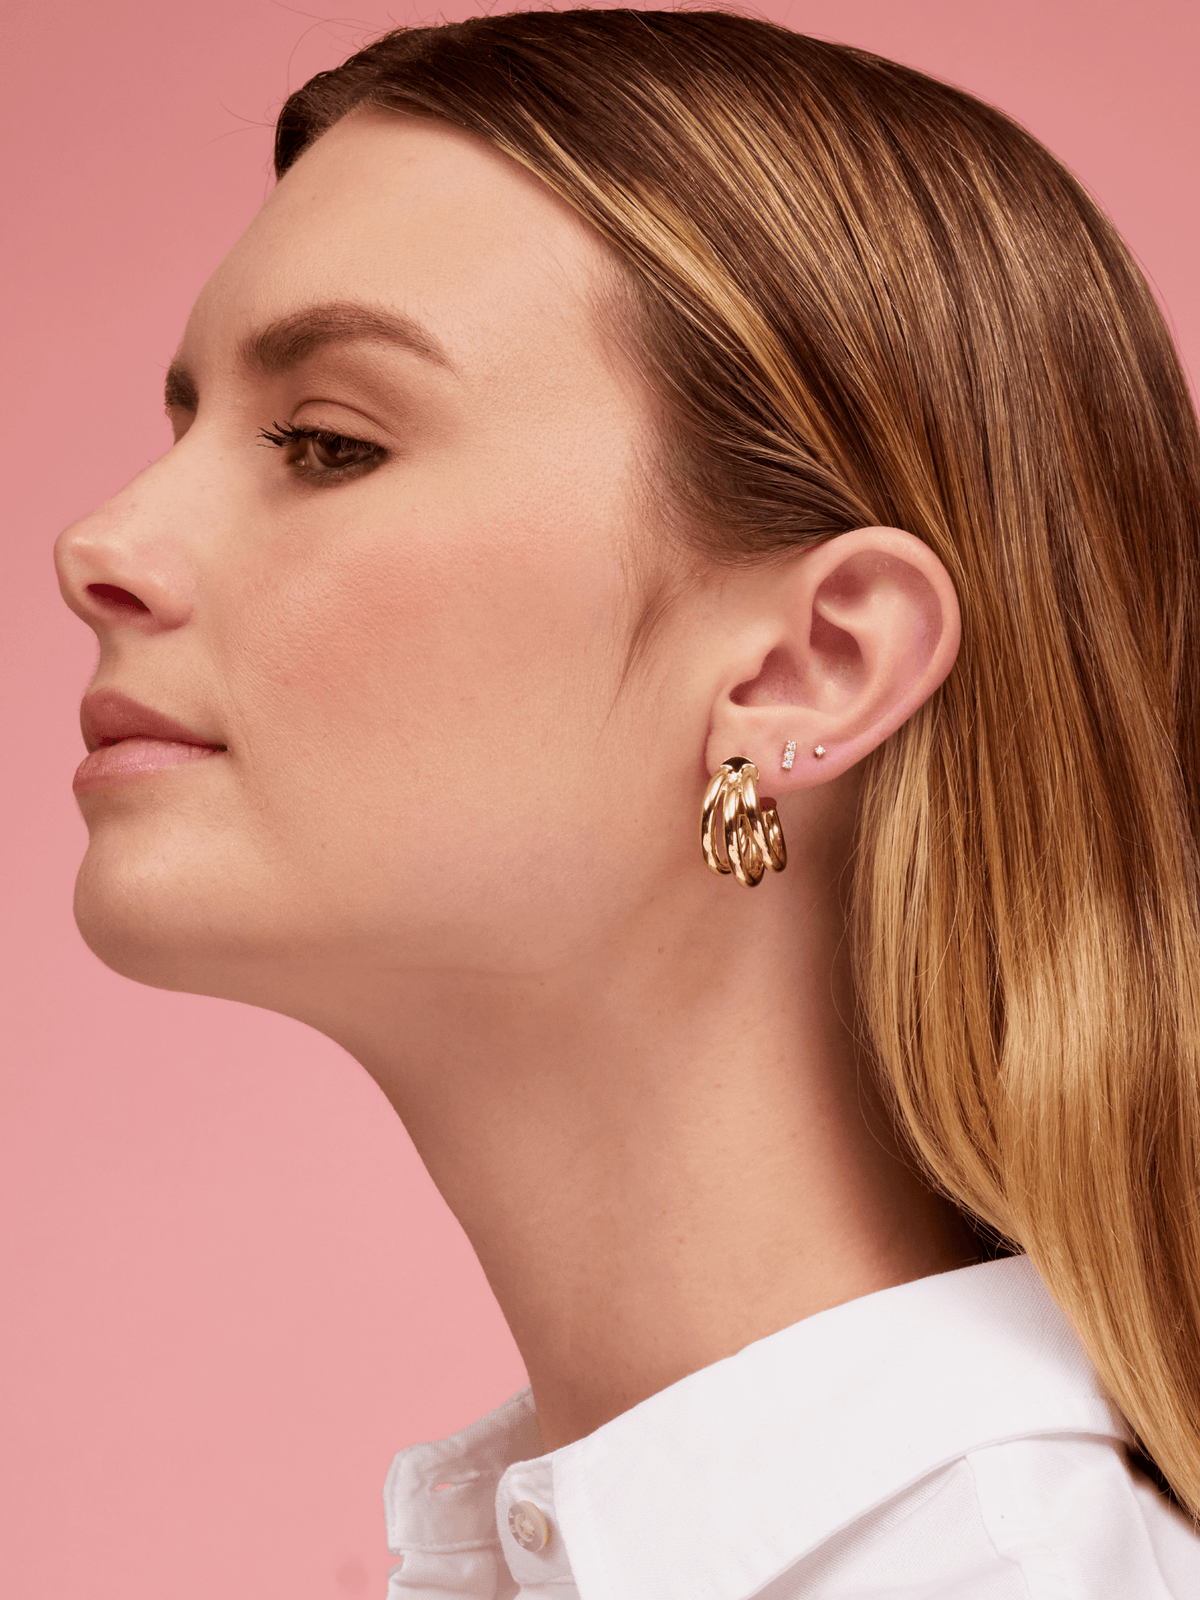 Tiny diamond earring paired with diamond bar stud and chunk gold earrings